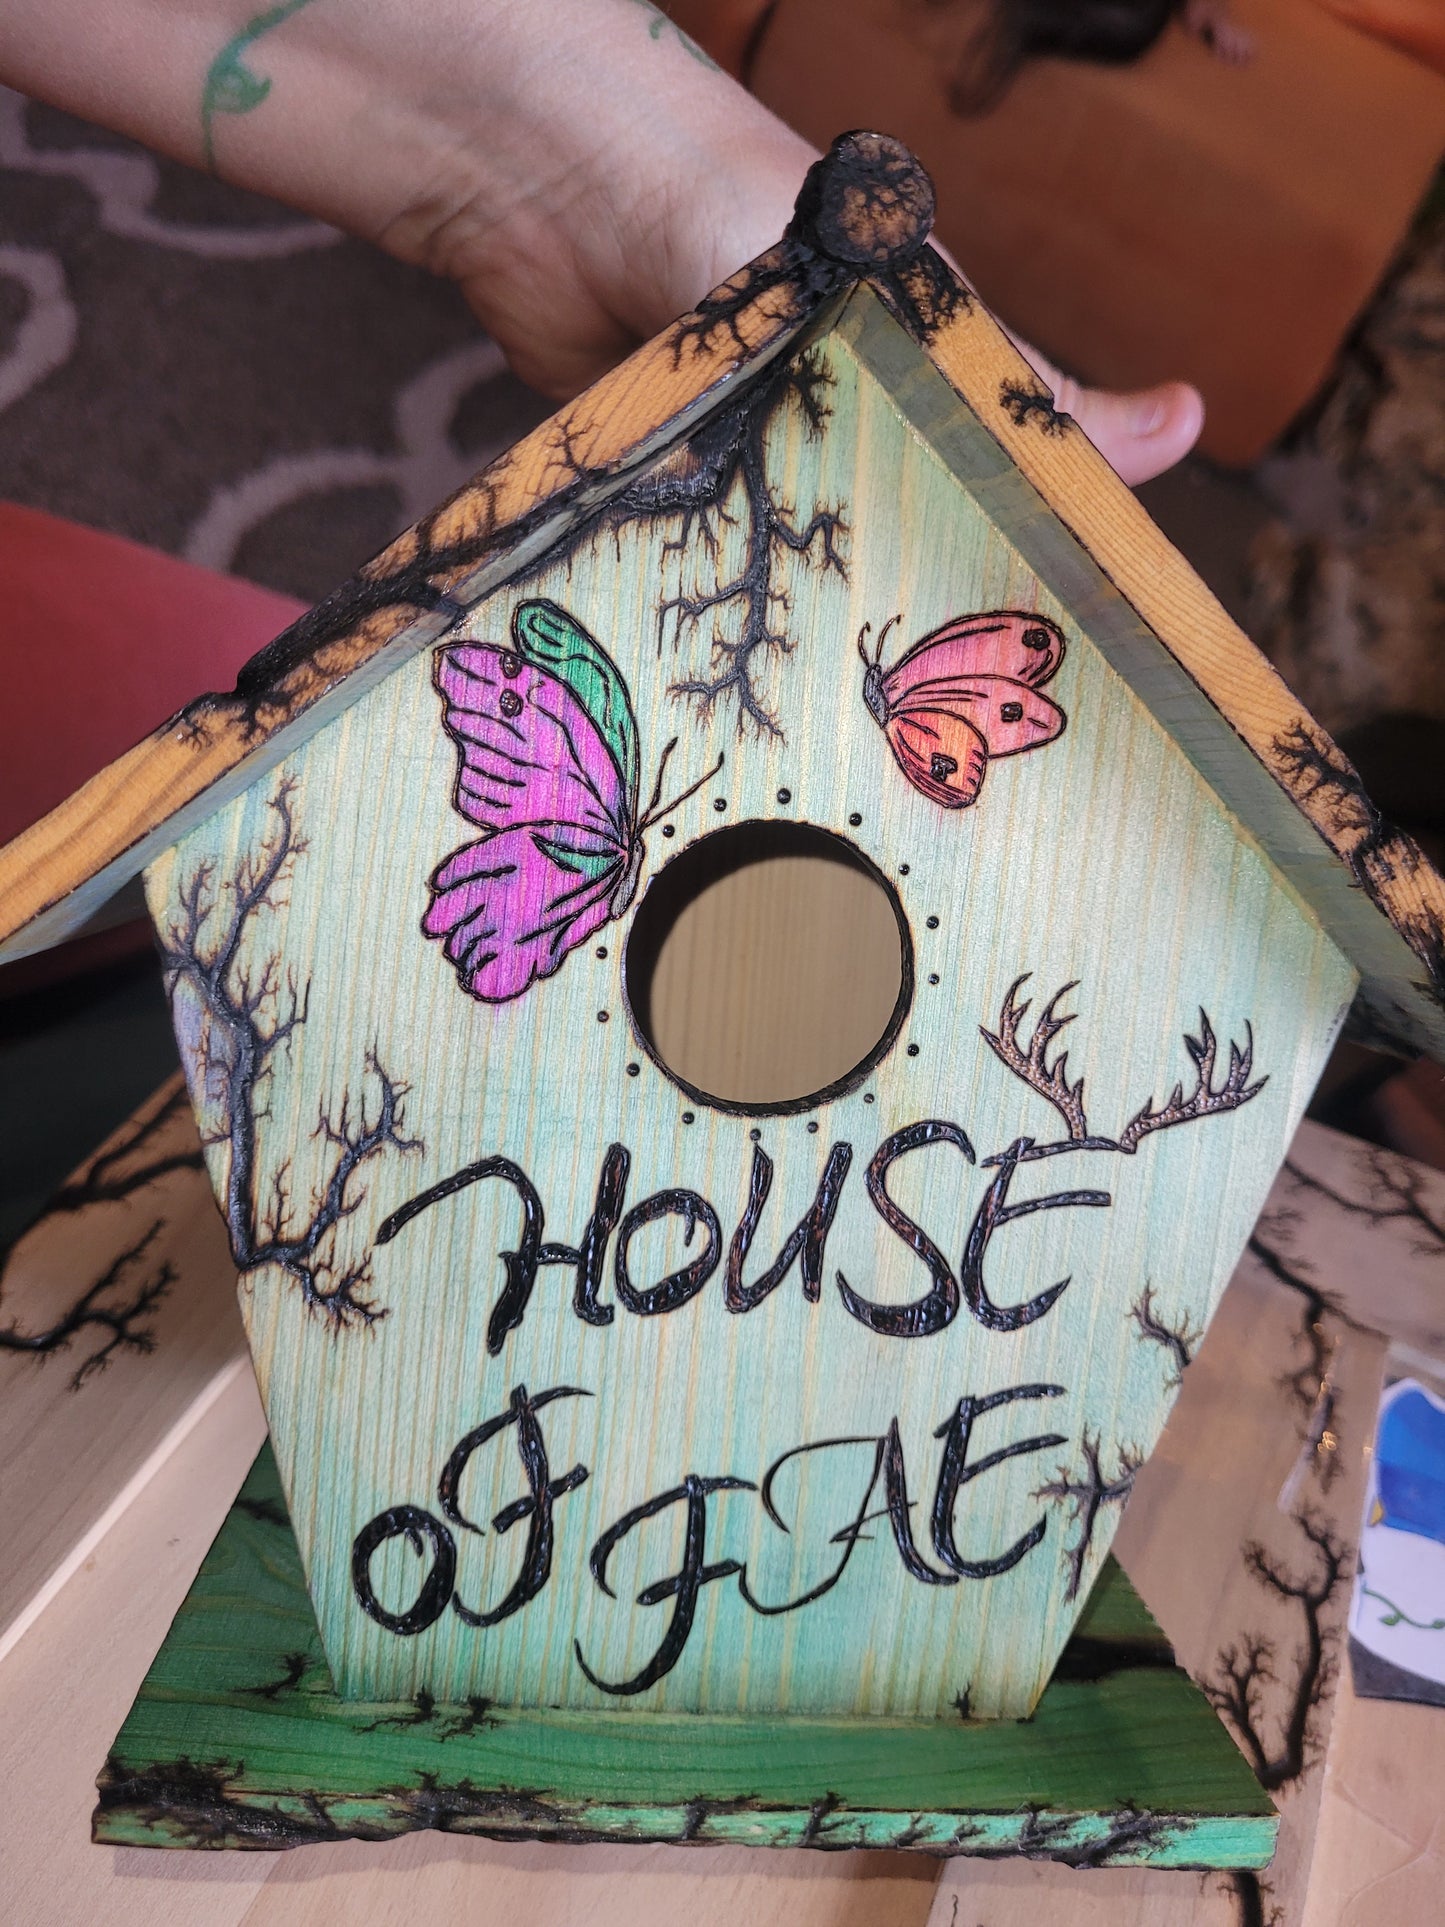 House of Fae...a Birdhouse - 'Pyrographics by The Ragdoll Princess'